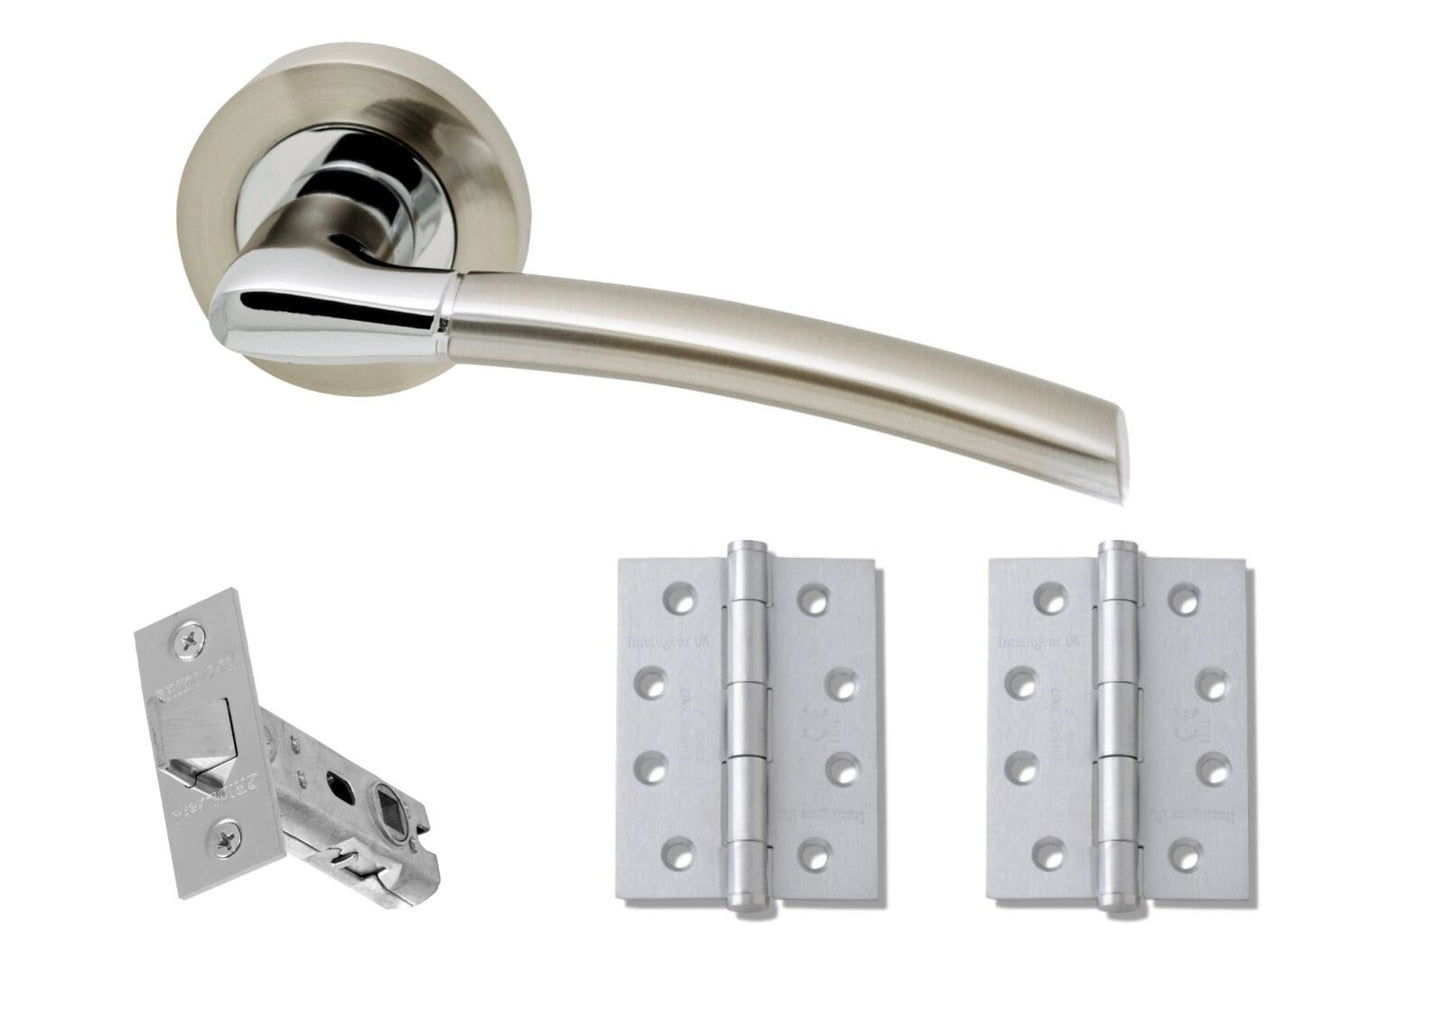 Modern Satin Nickel and Polished Chrome Rose Lever Door Handle - Falcon